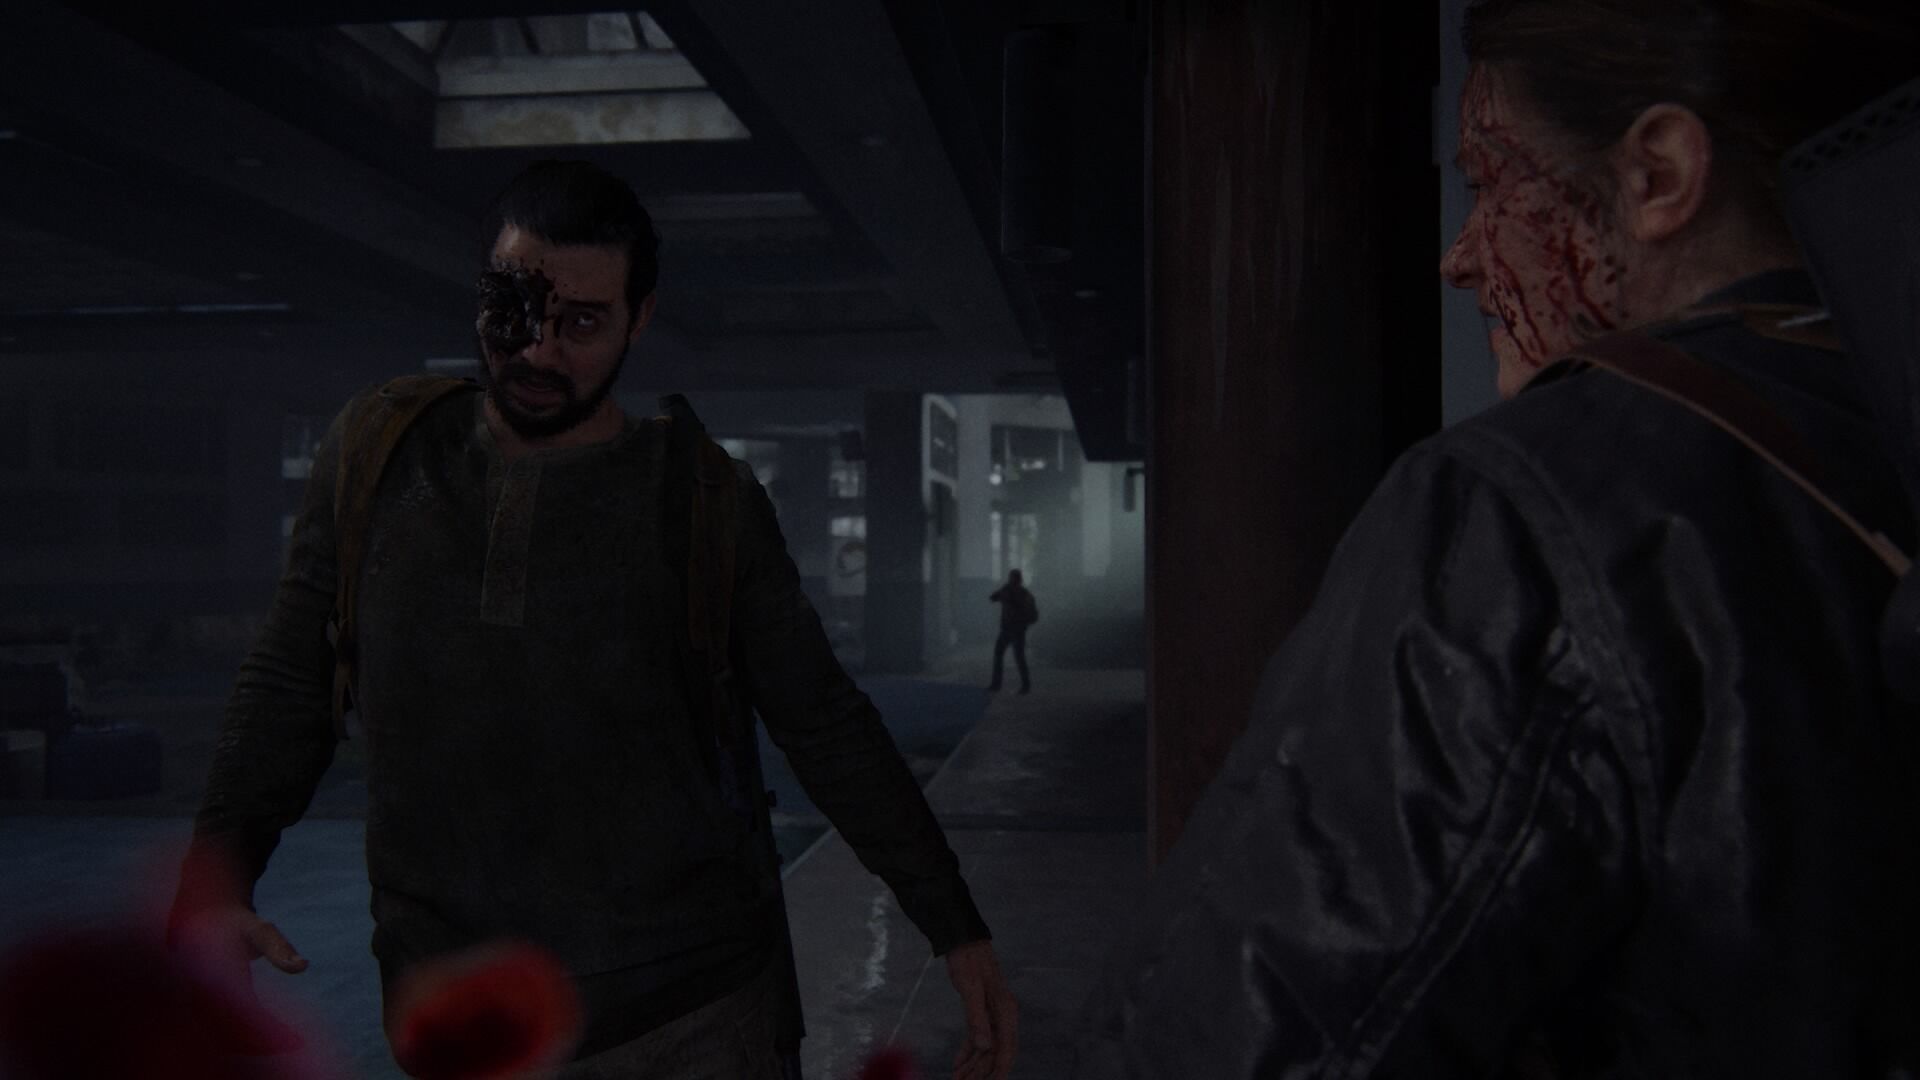 Where did Tommy go in The Last of Us Part 2 in the end? Did he